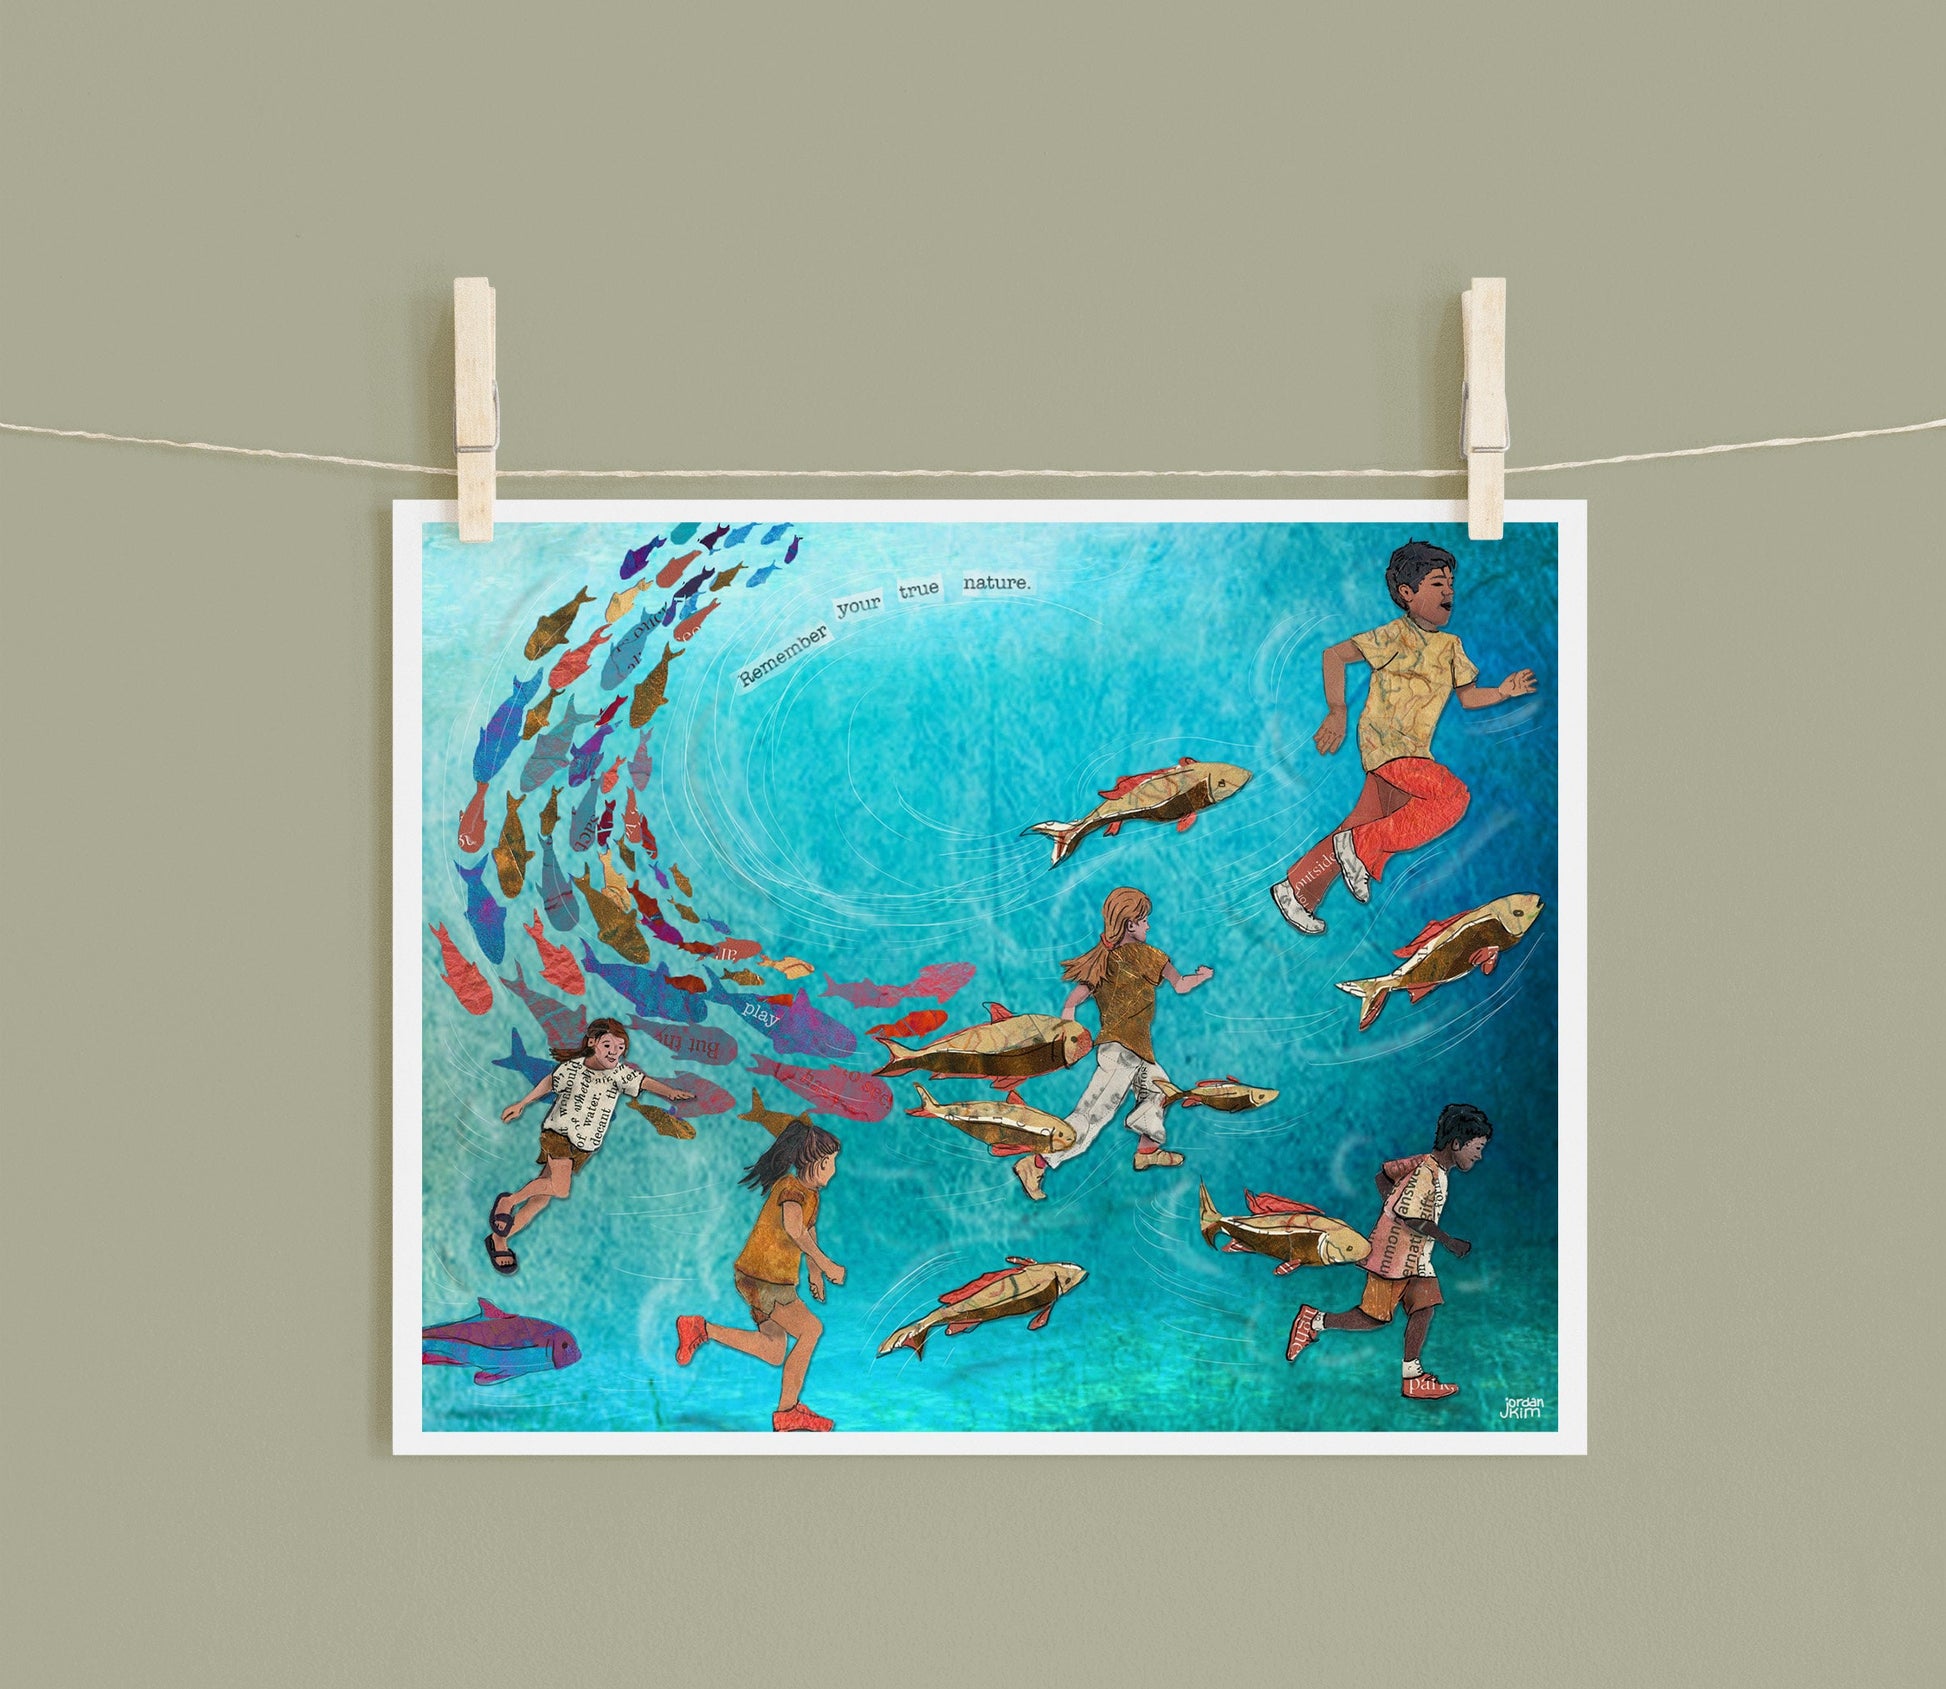 8x10 Art Print of a mixed media collage of children playing tag with schooling fish underwater, aqua, teal, play, connection to nature